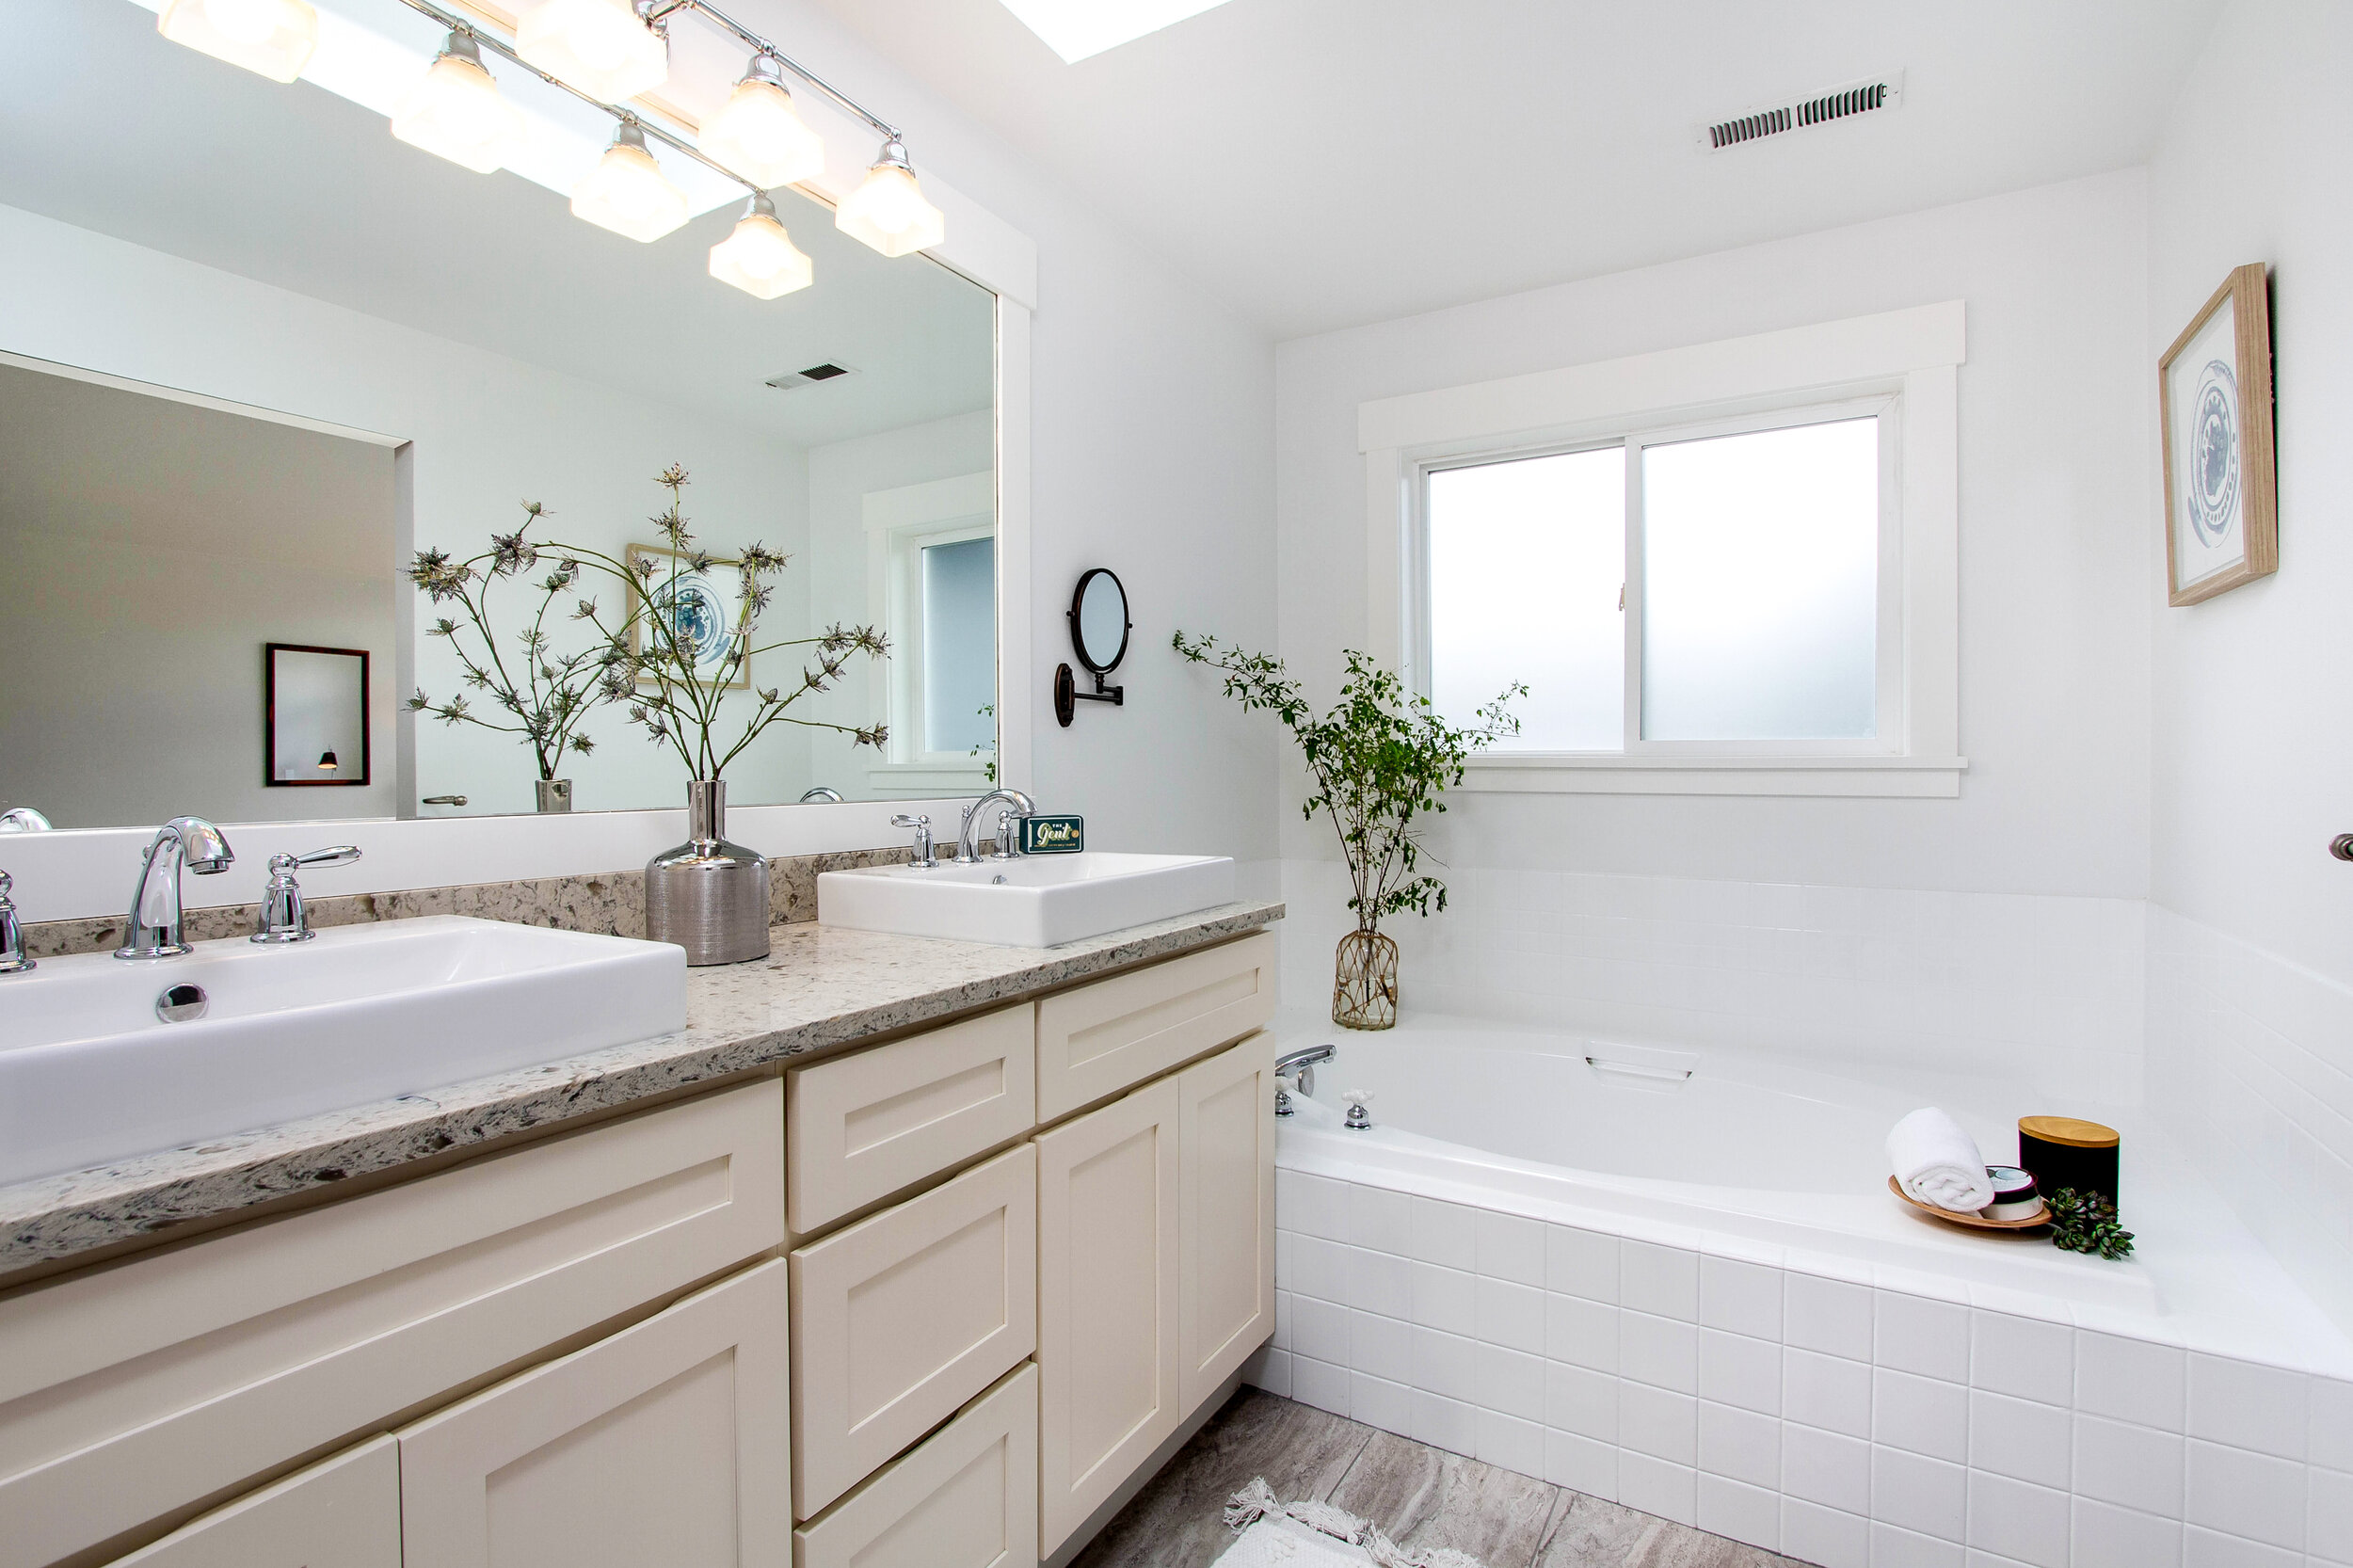  Refresh in the master bath, equipped with dual sinks, a soaking tub, and a standing shower. 